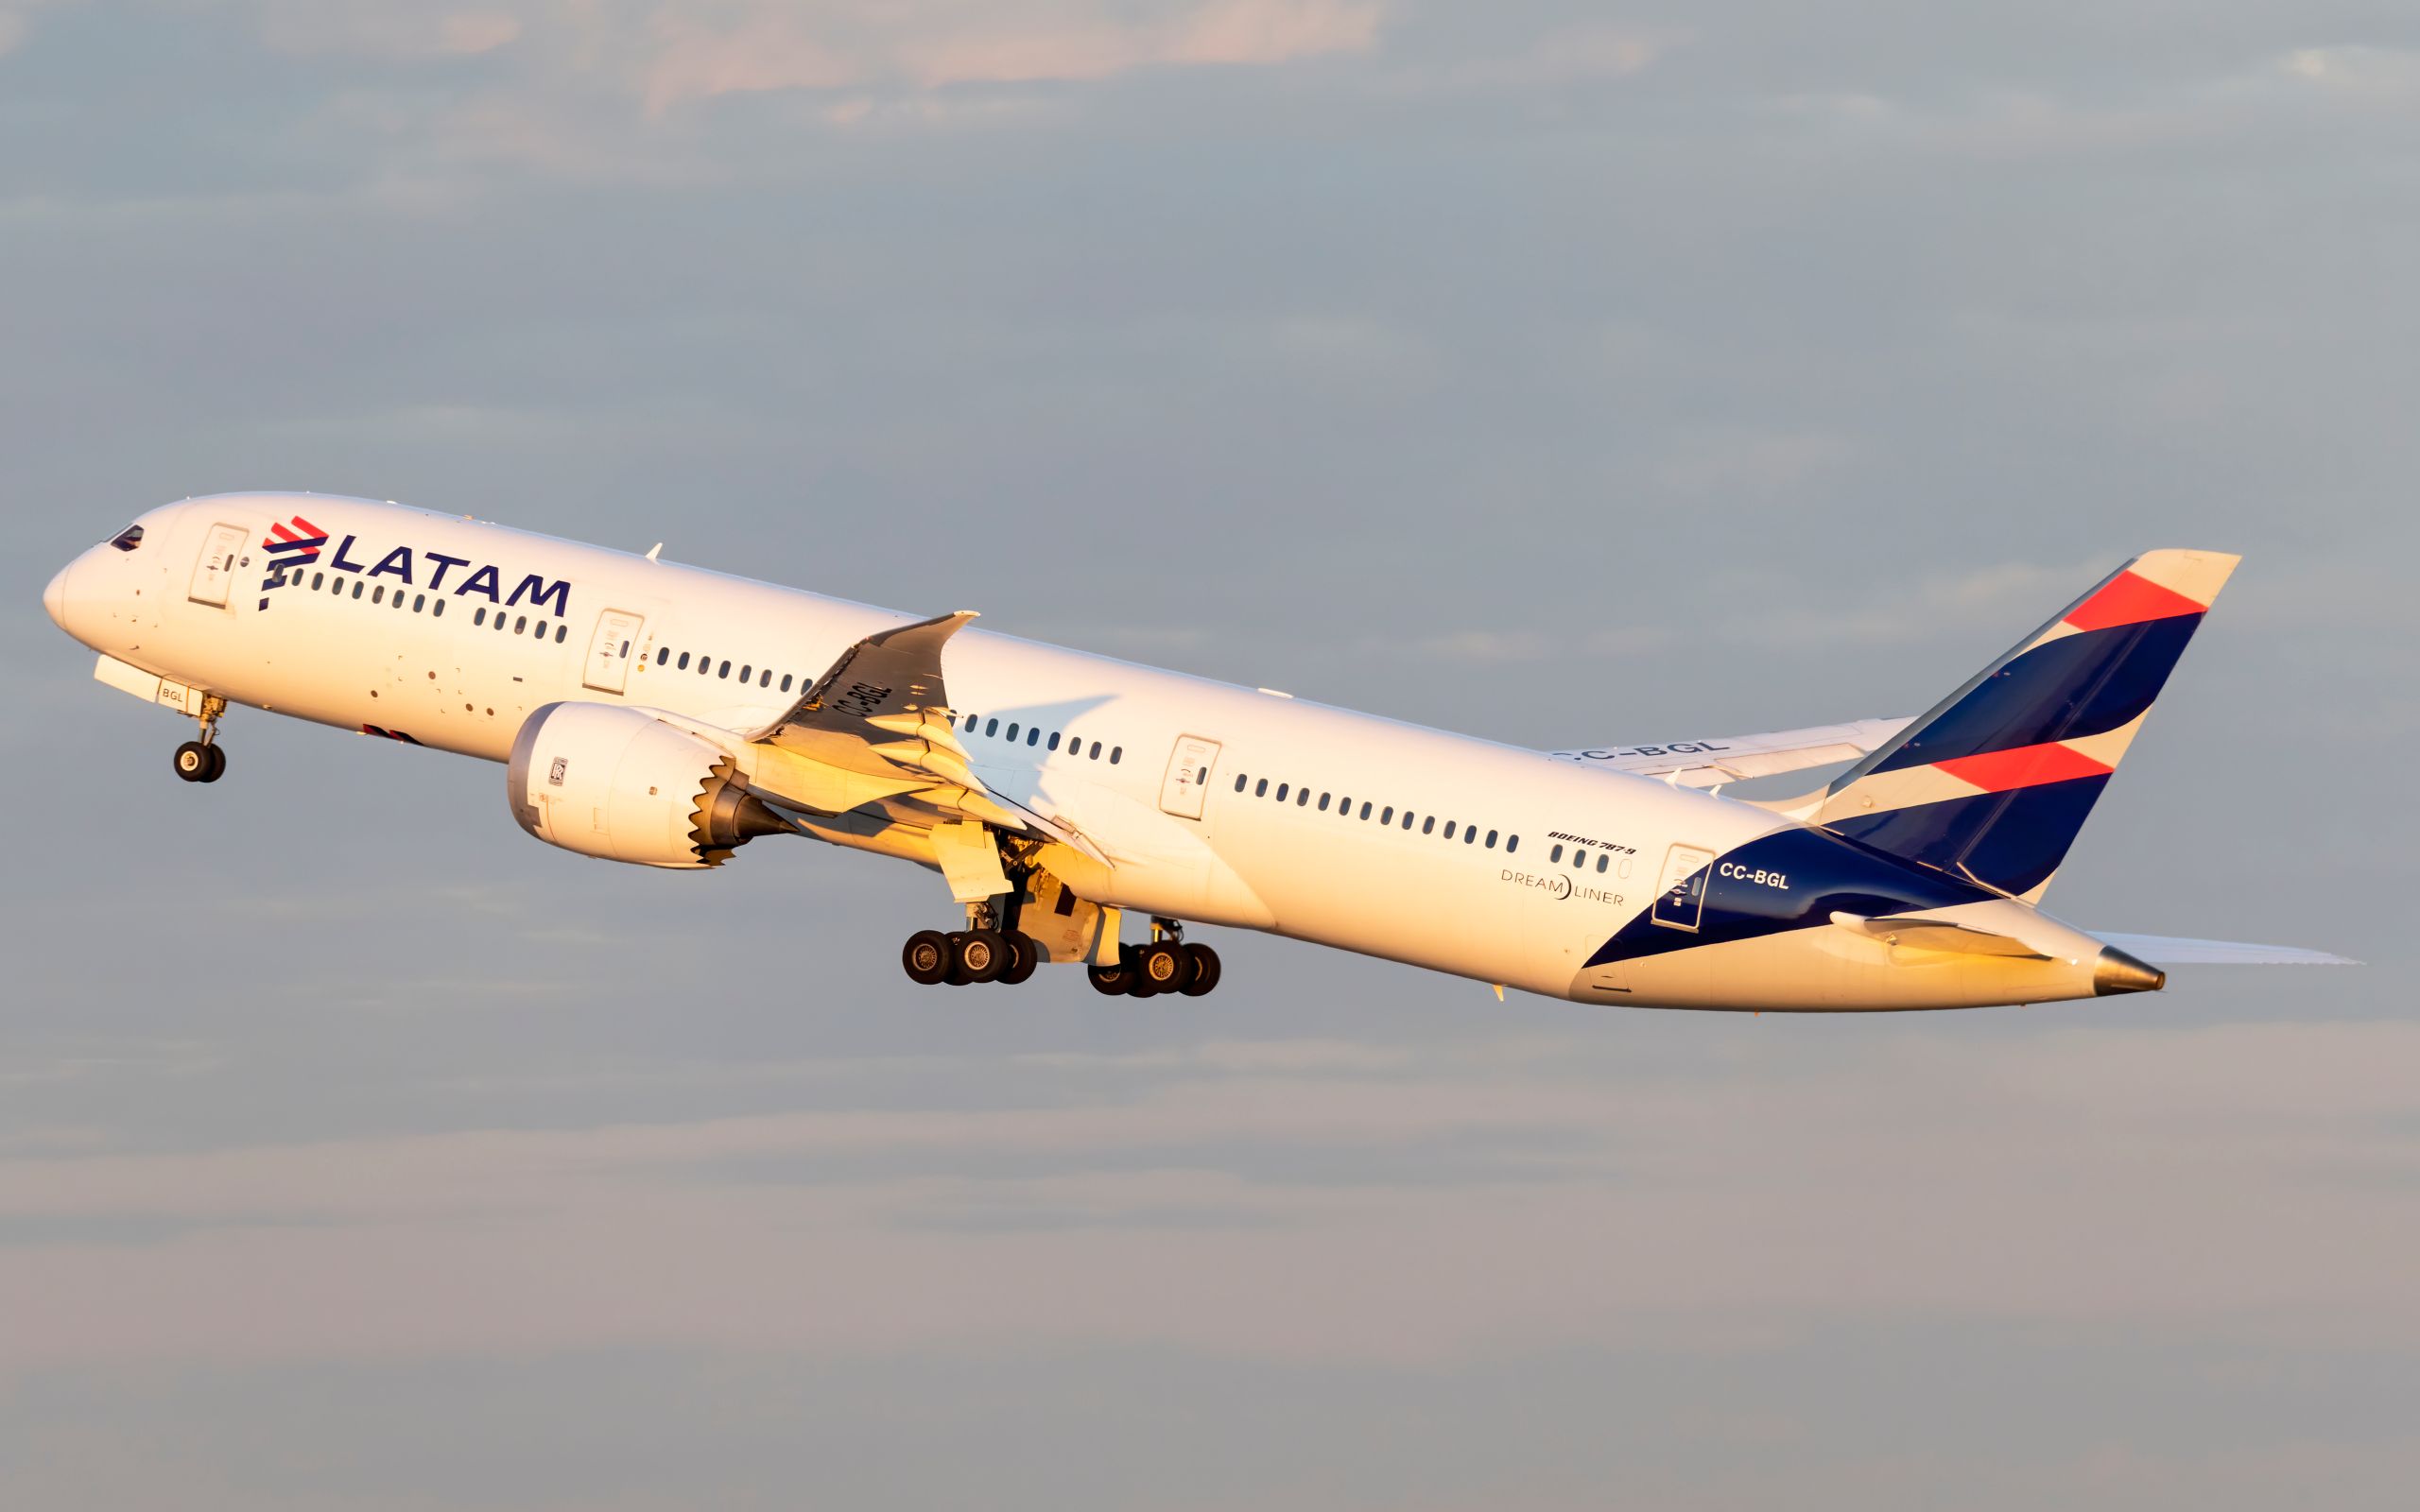 LATAM Brazil Takes Its First Boeing 787 Dreamliner